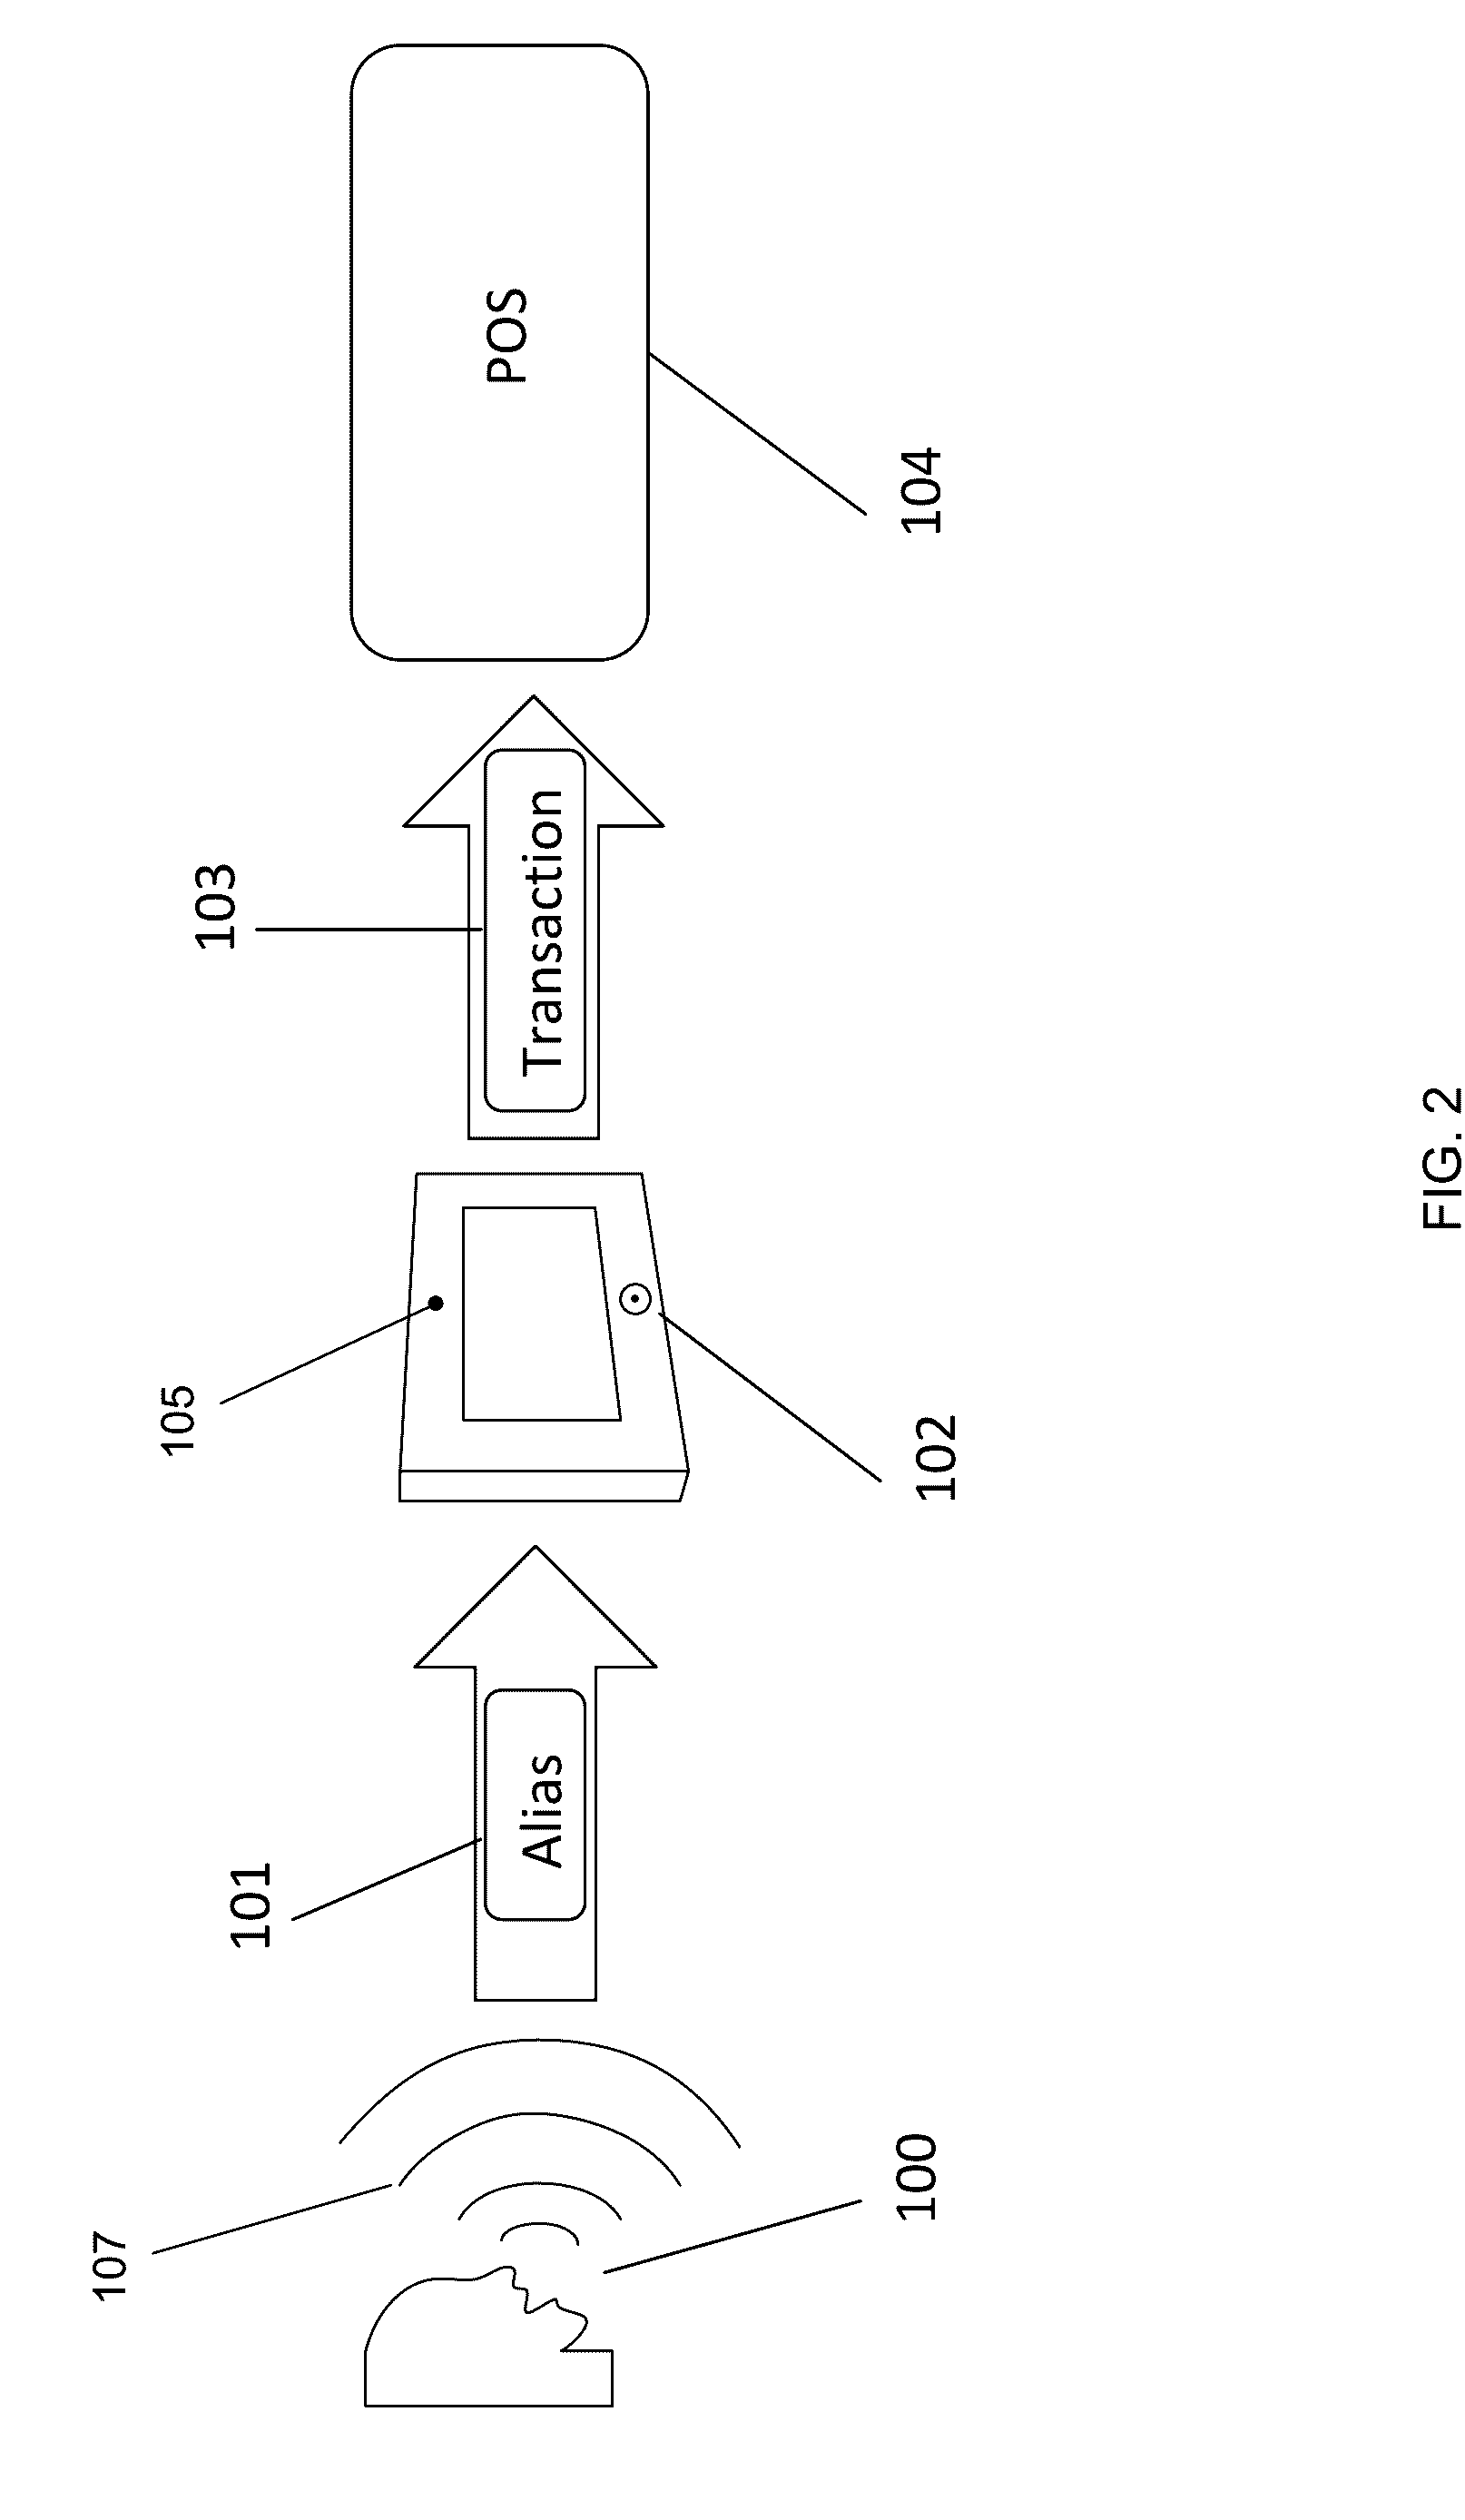 Sound-Directed or Behavior-Directed Method and System for Authenticating a User and Executing a Transaction